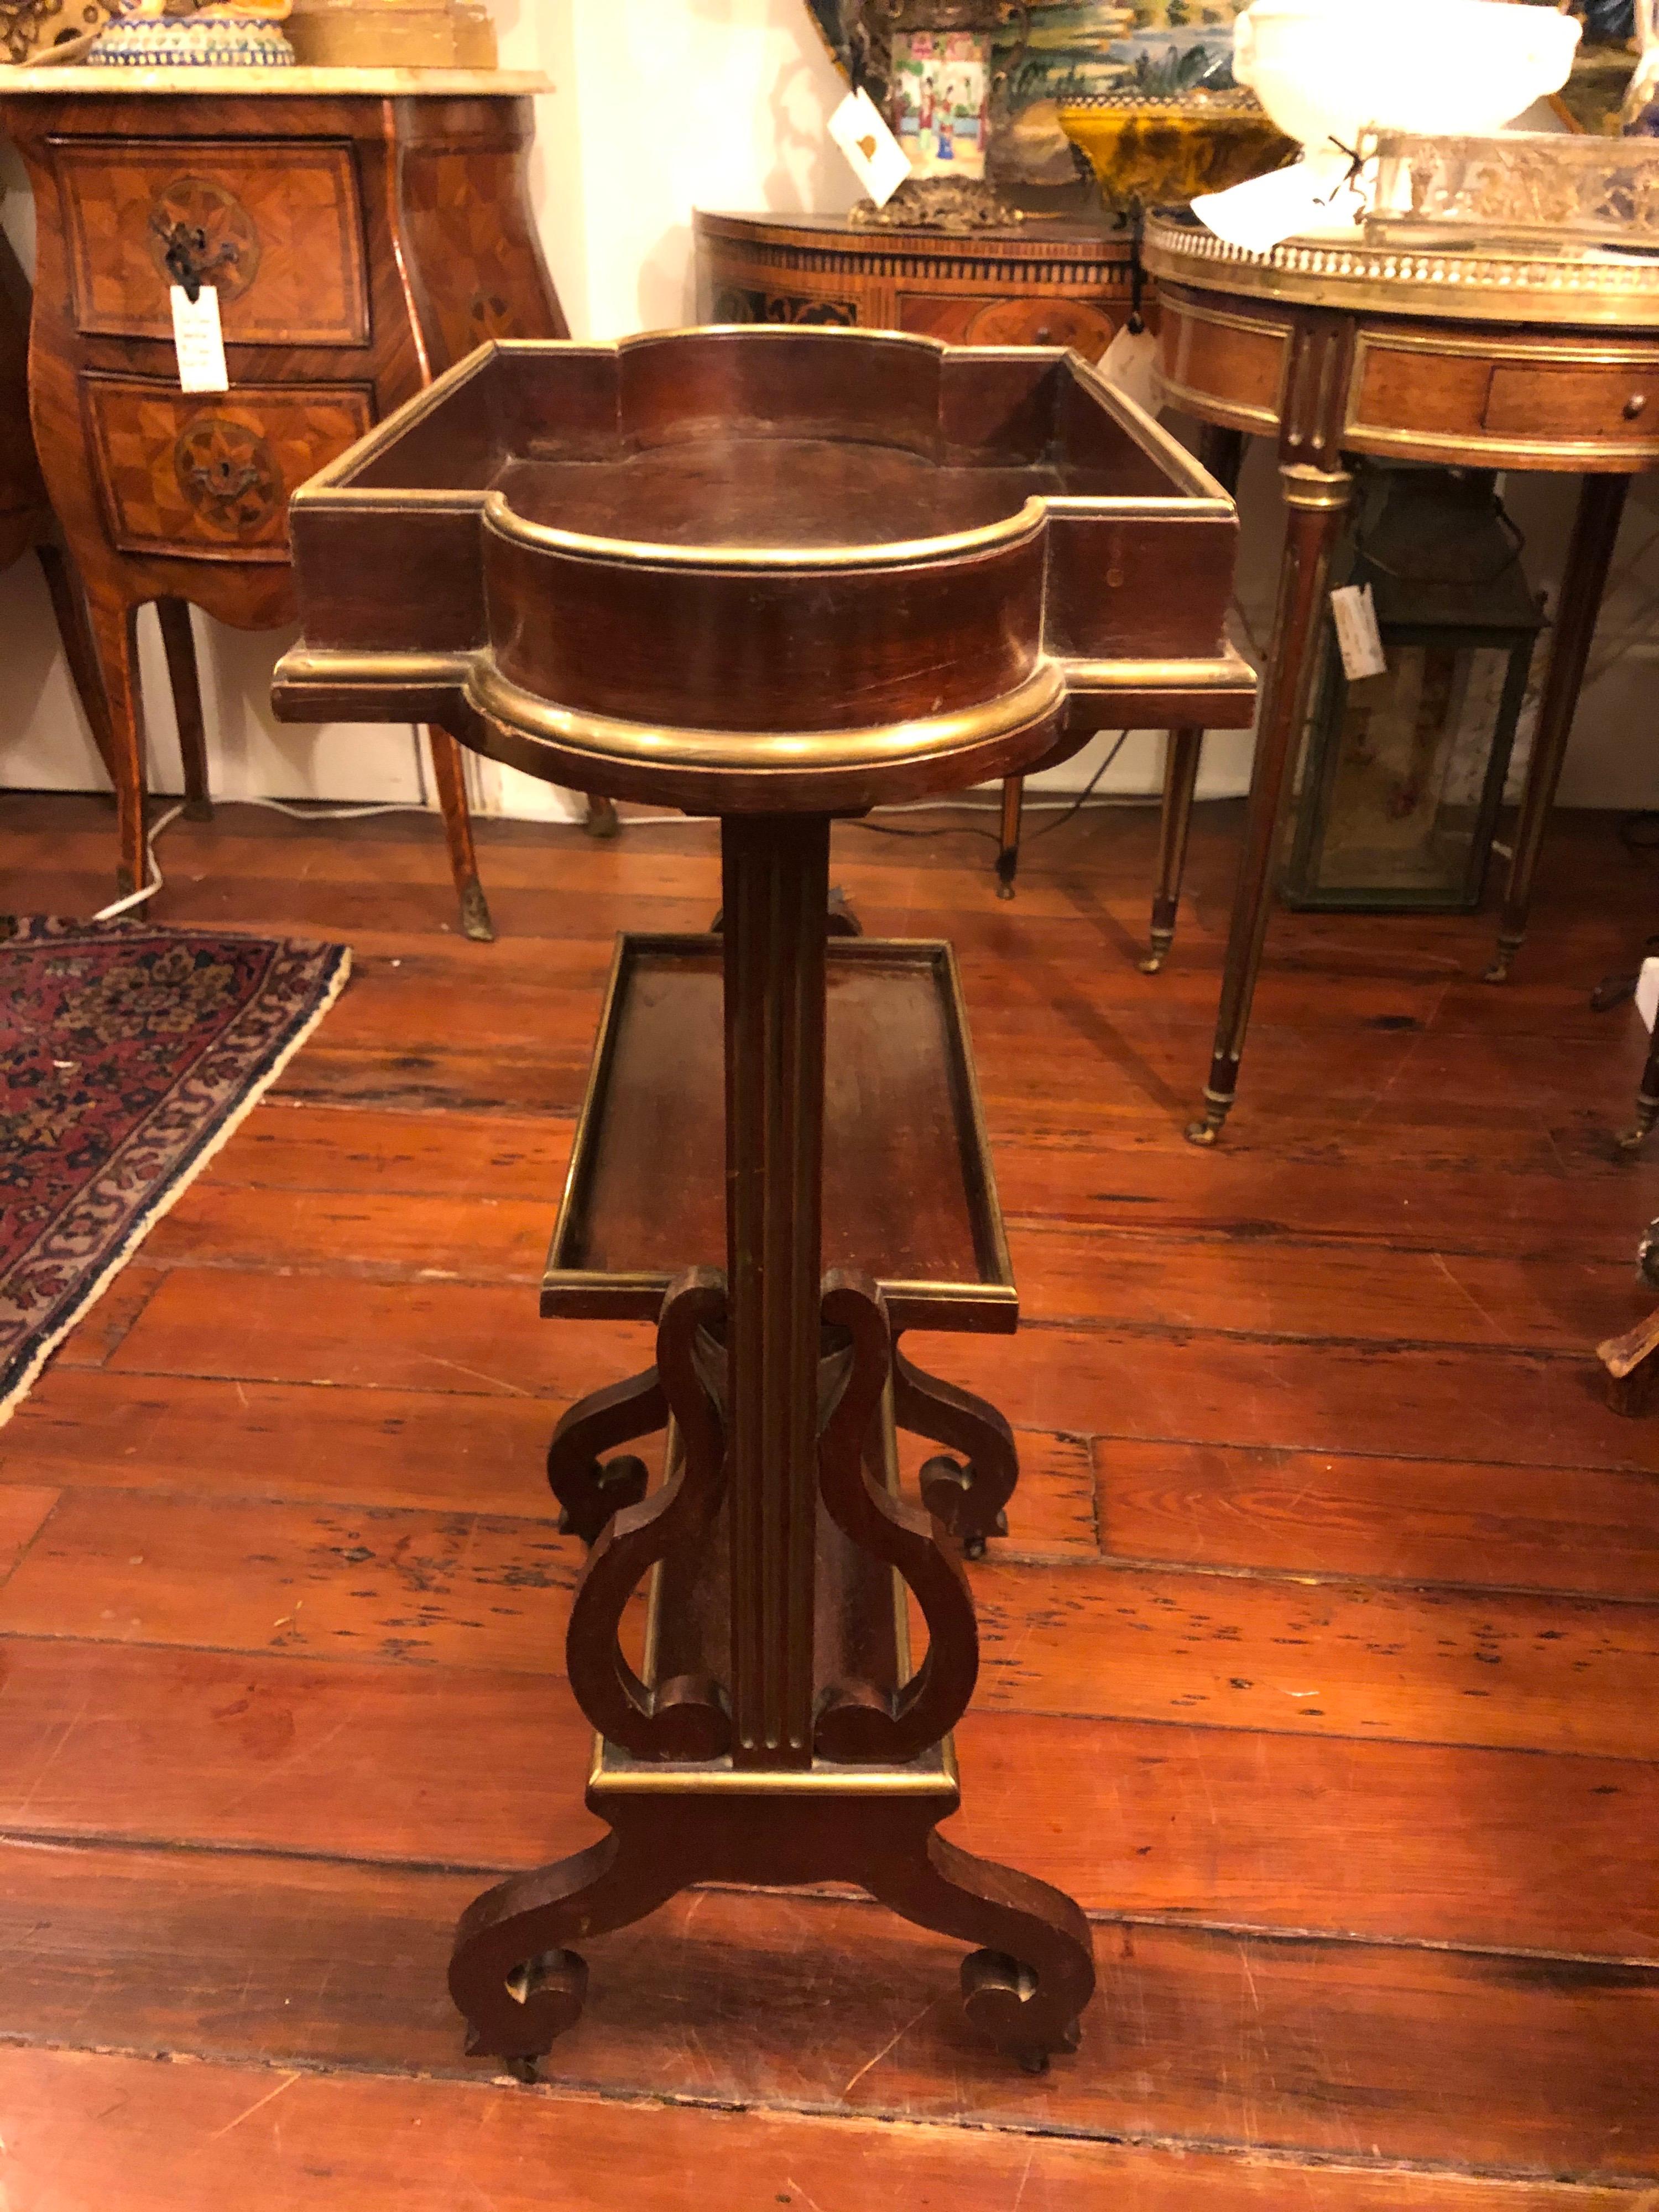 Small French Napoleon III occasional table with three surfaces two flat and one curved. Mahogany with brass edging.